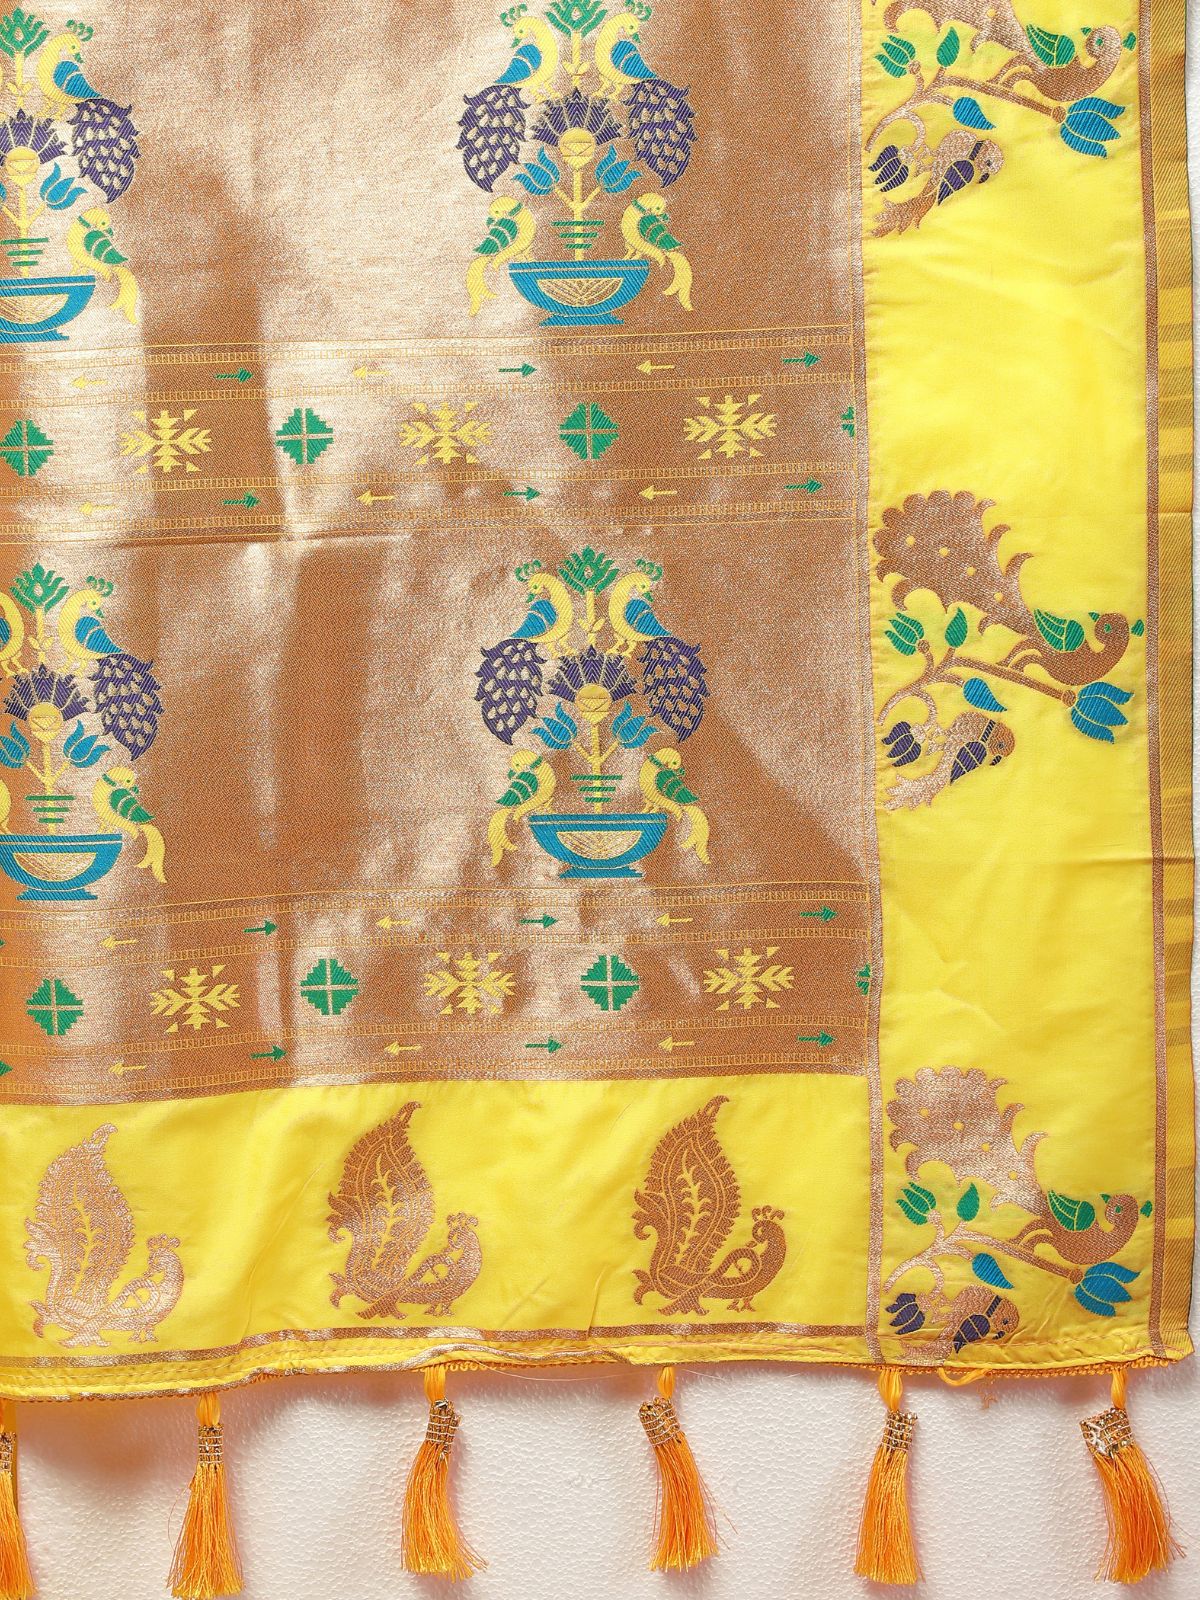 Odette Yellow Pathani Silk Woven Saree with Unstitched Blouse for Women